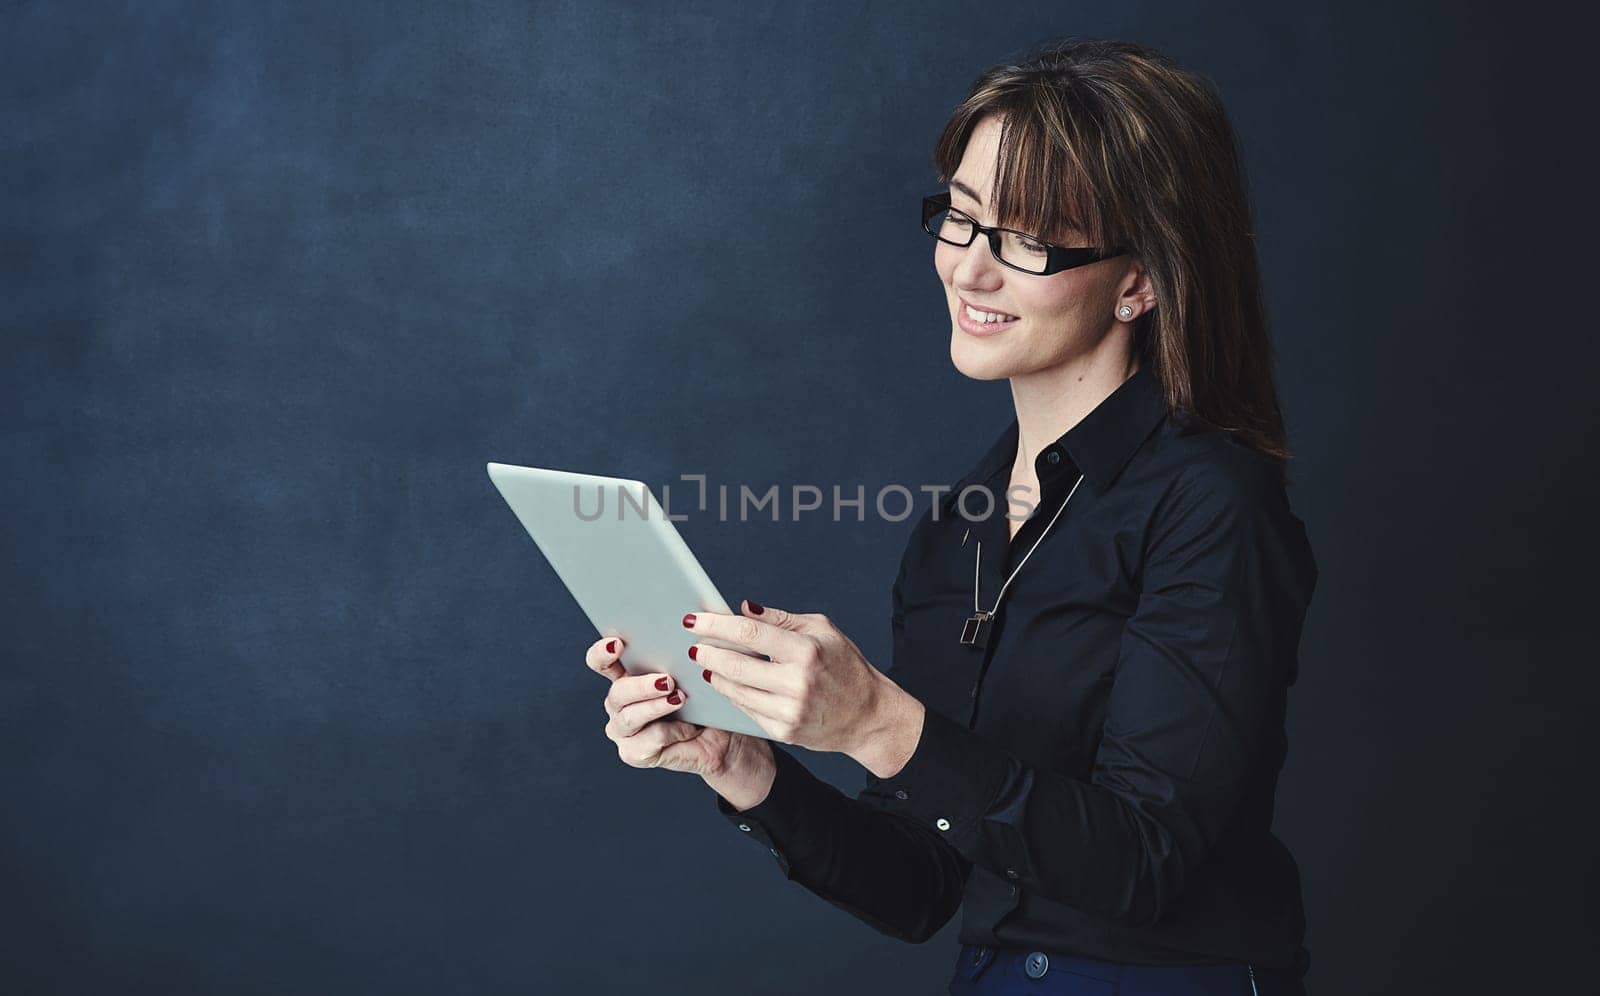 Organising her plans for success the smart way. Studio portrait of a corporate businesswoman using a digital tablet against a dark background